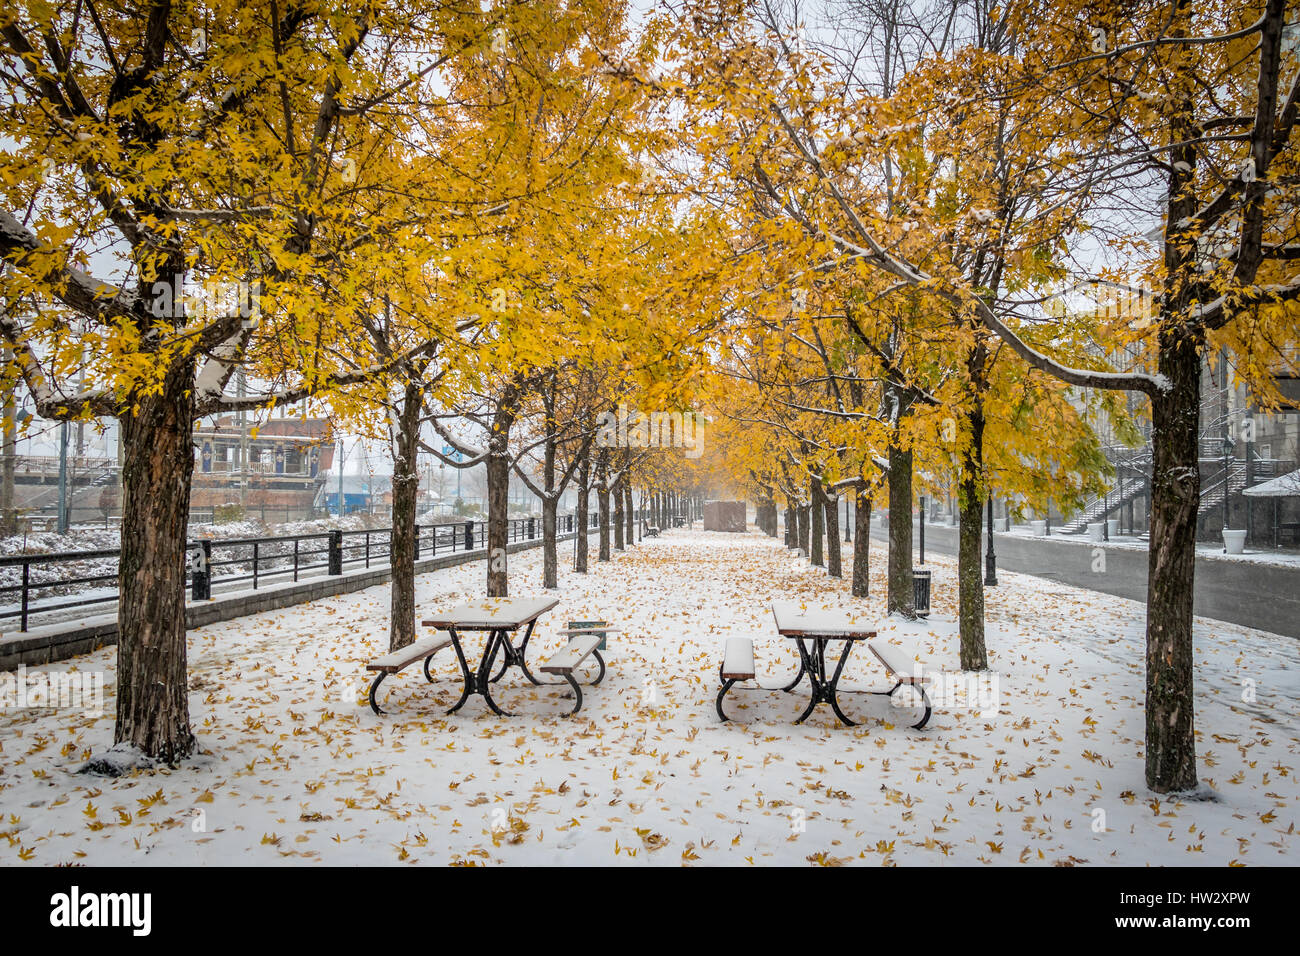 Walkway on the first snow with yellow leaves falling of trees - Montreal, Quebec, Canada Stock Photo